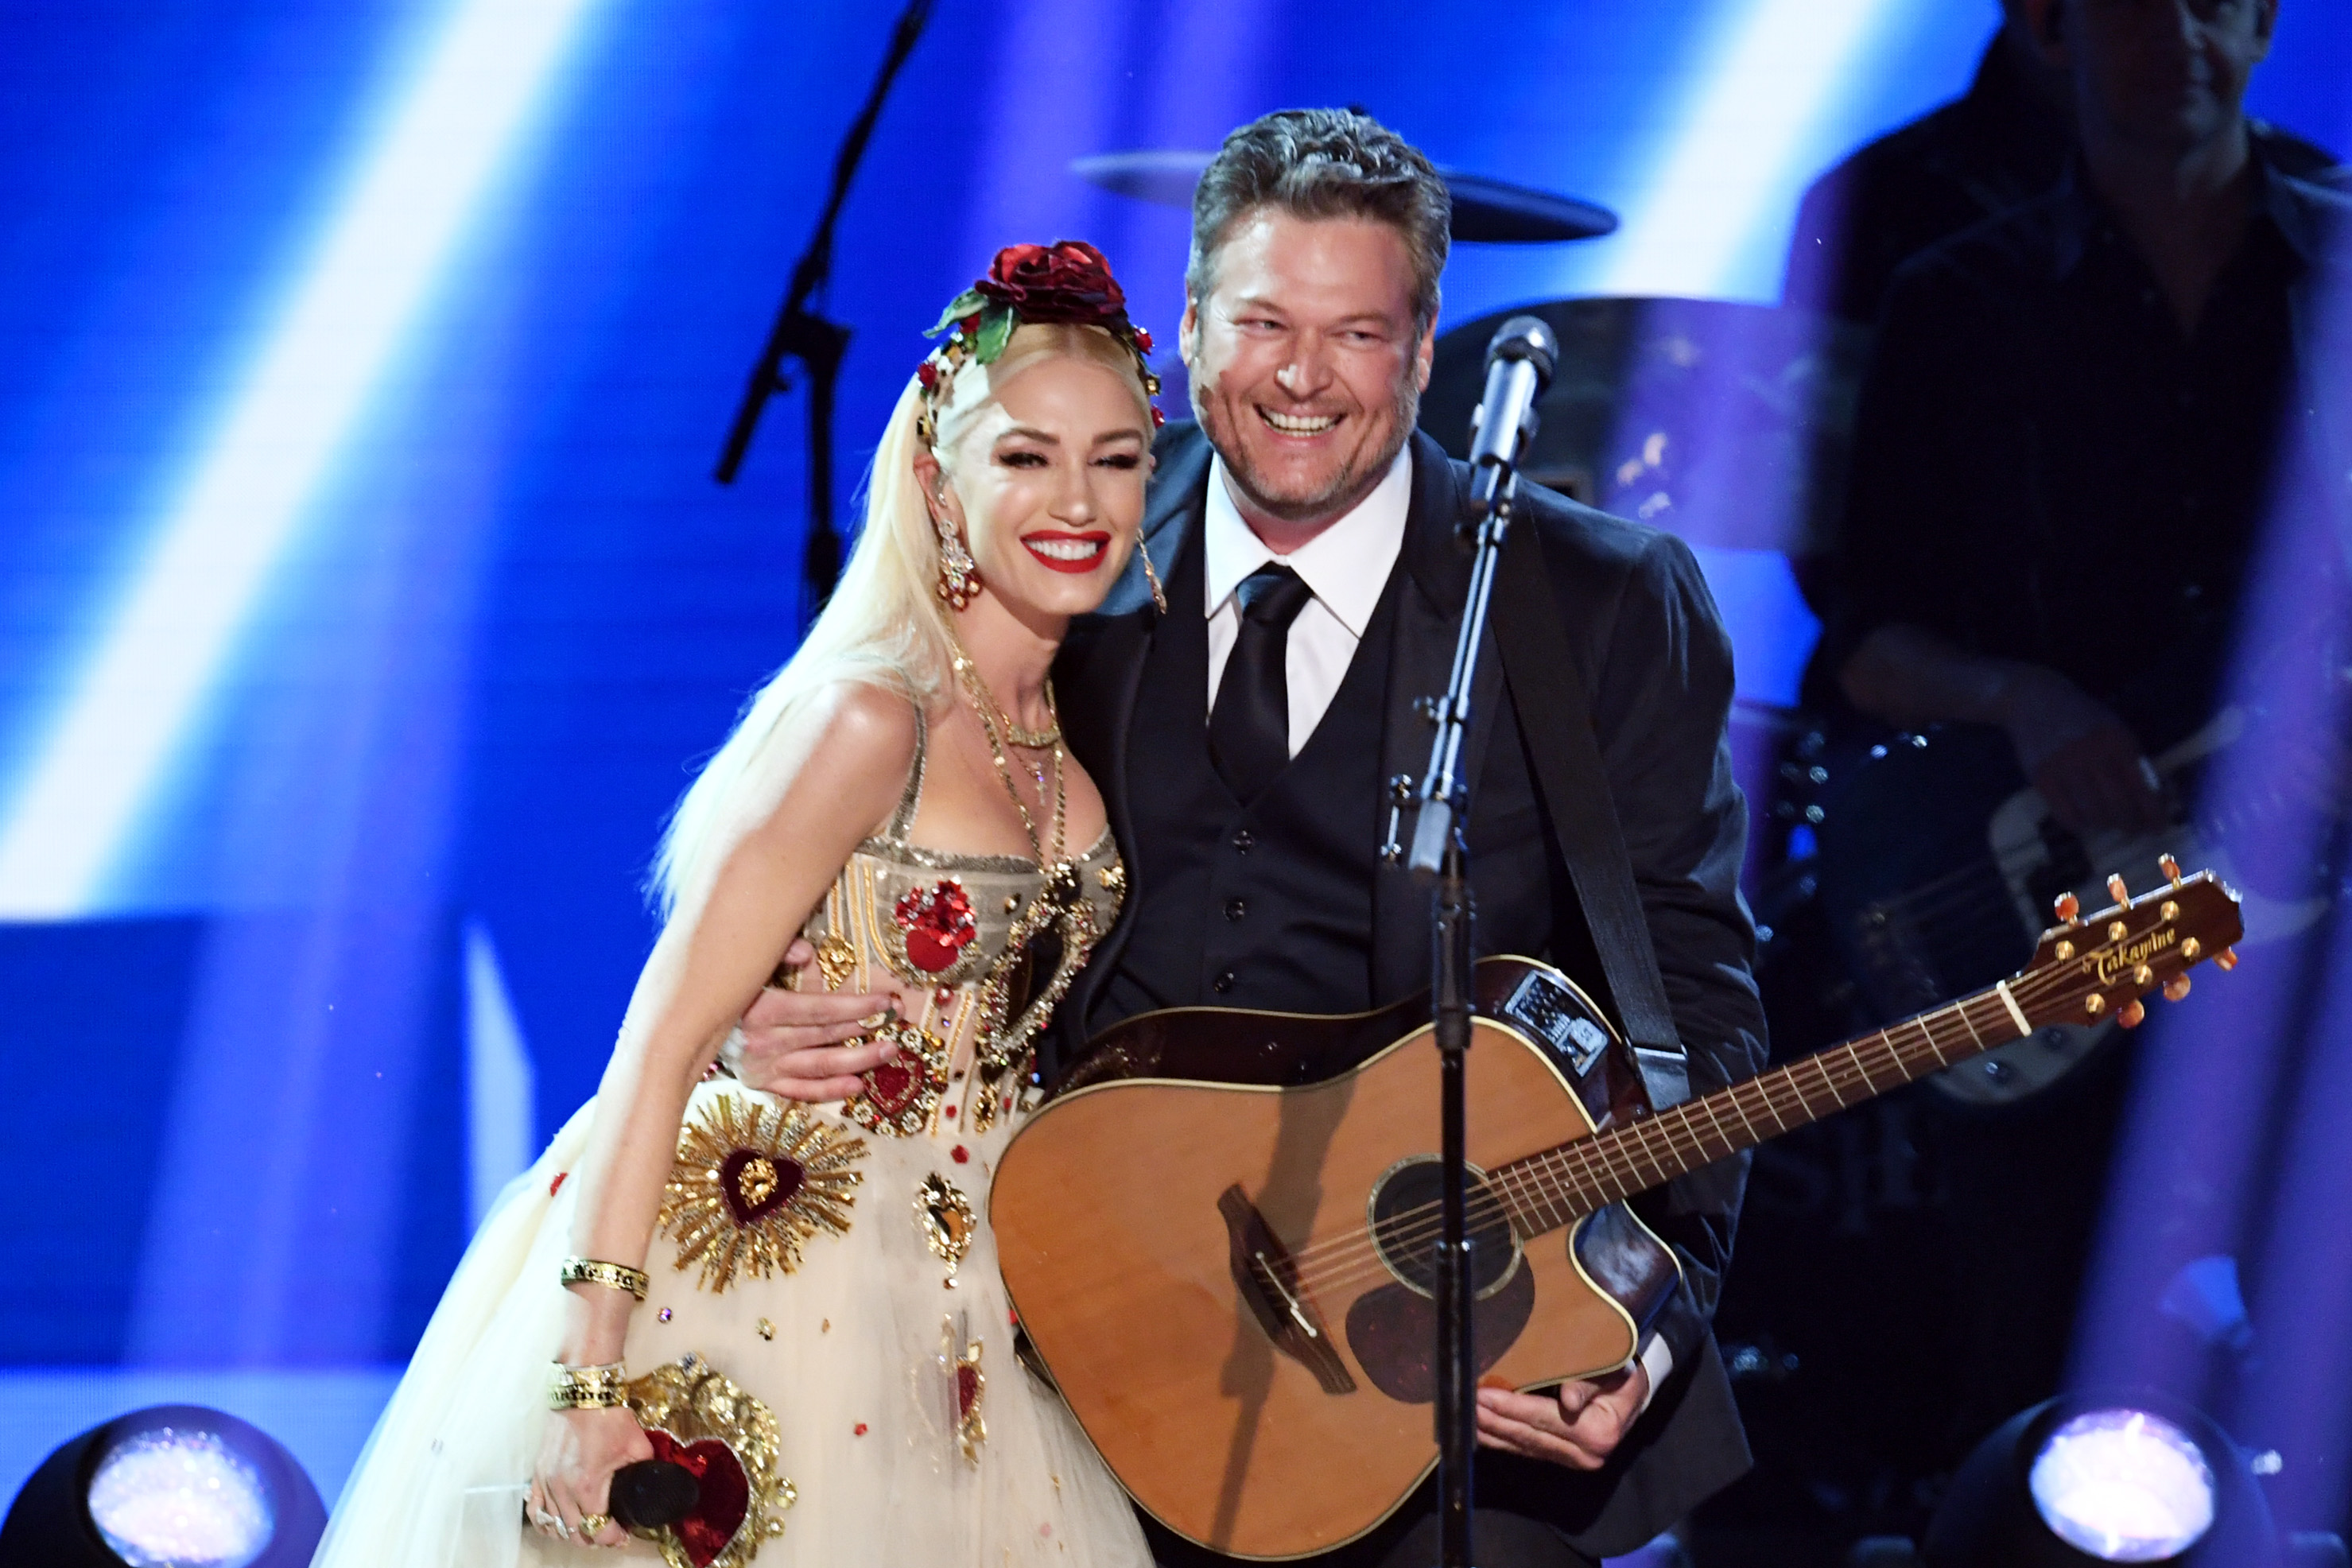 Rumors have swirled that Blake and Gwen were splitting up after fans noticed them spending more time apart